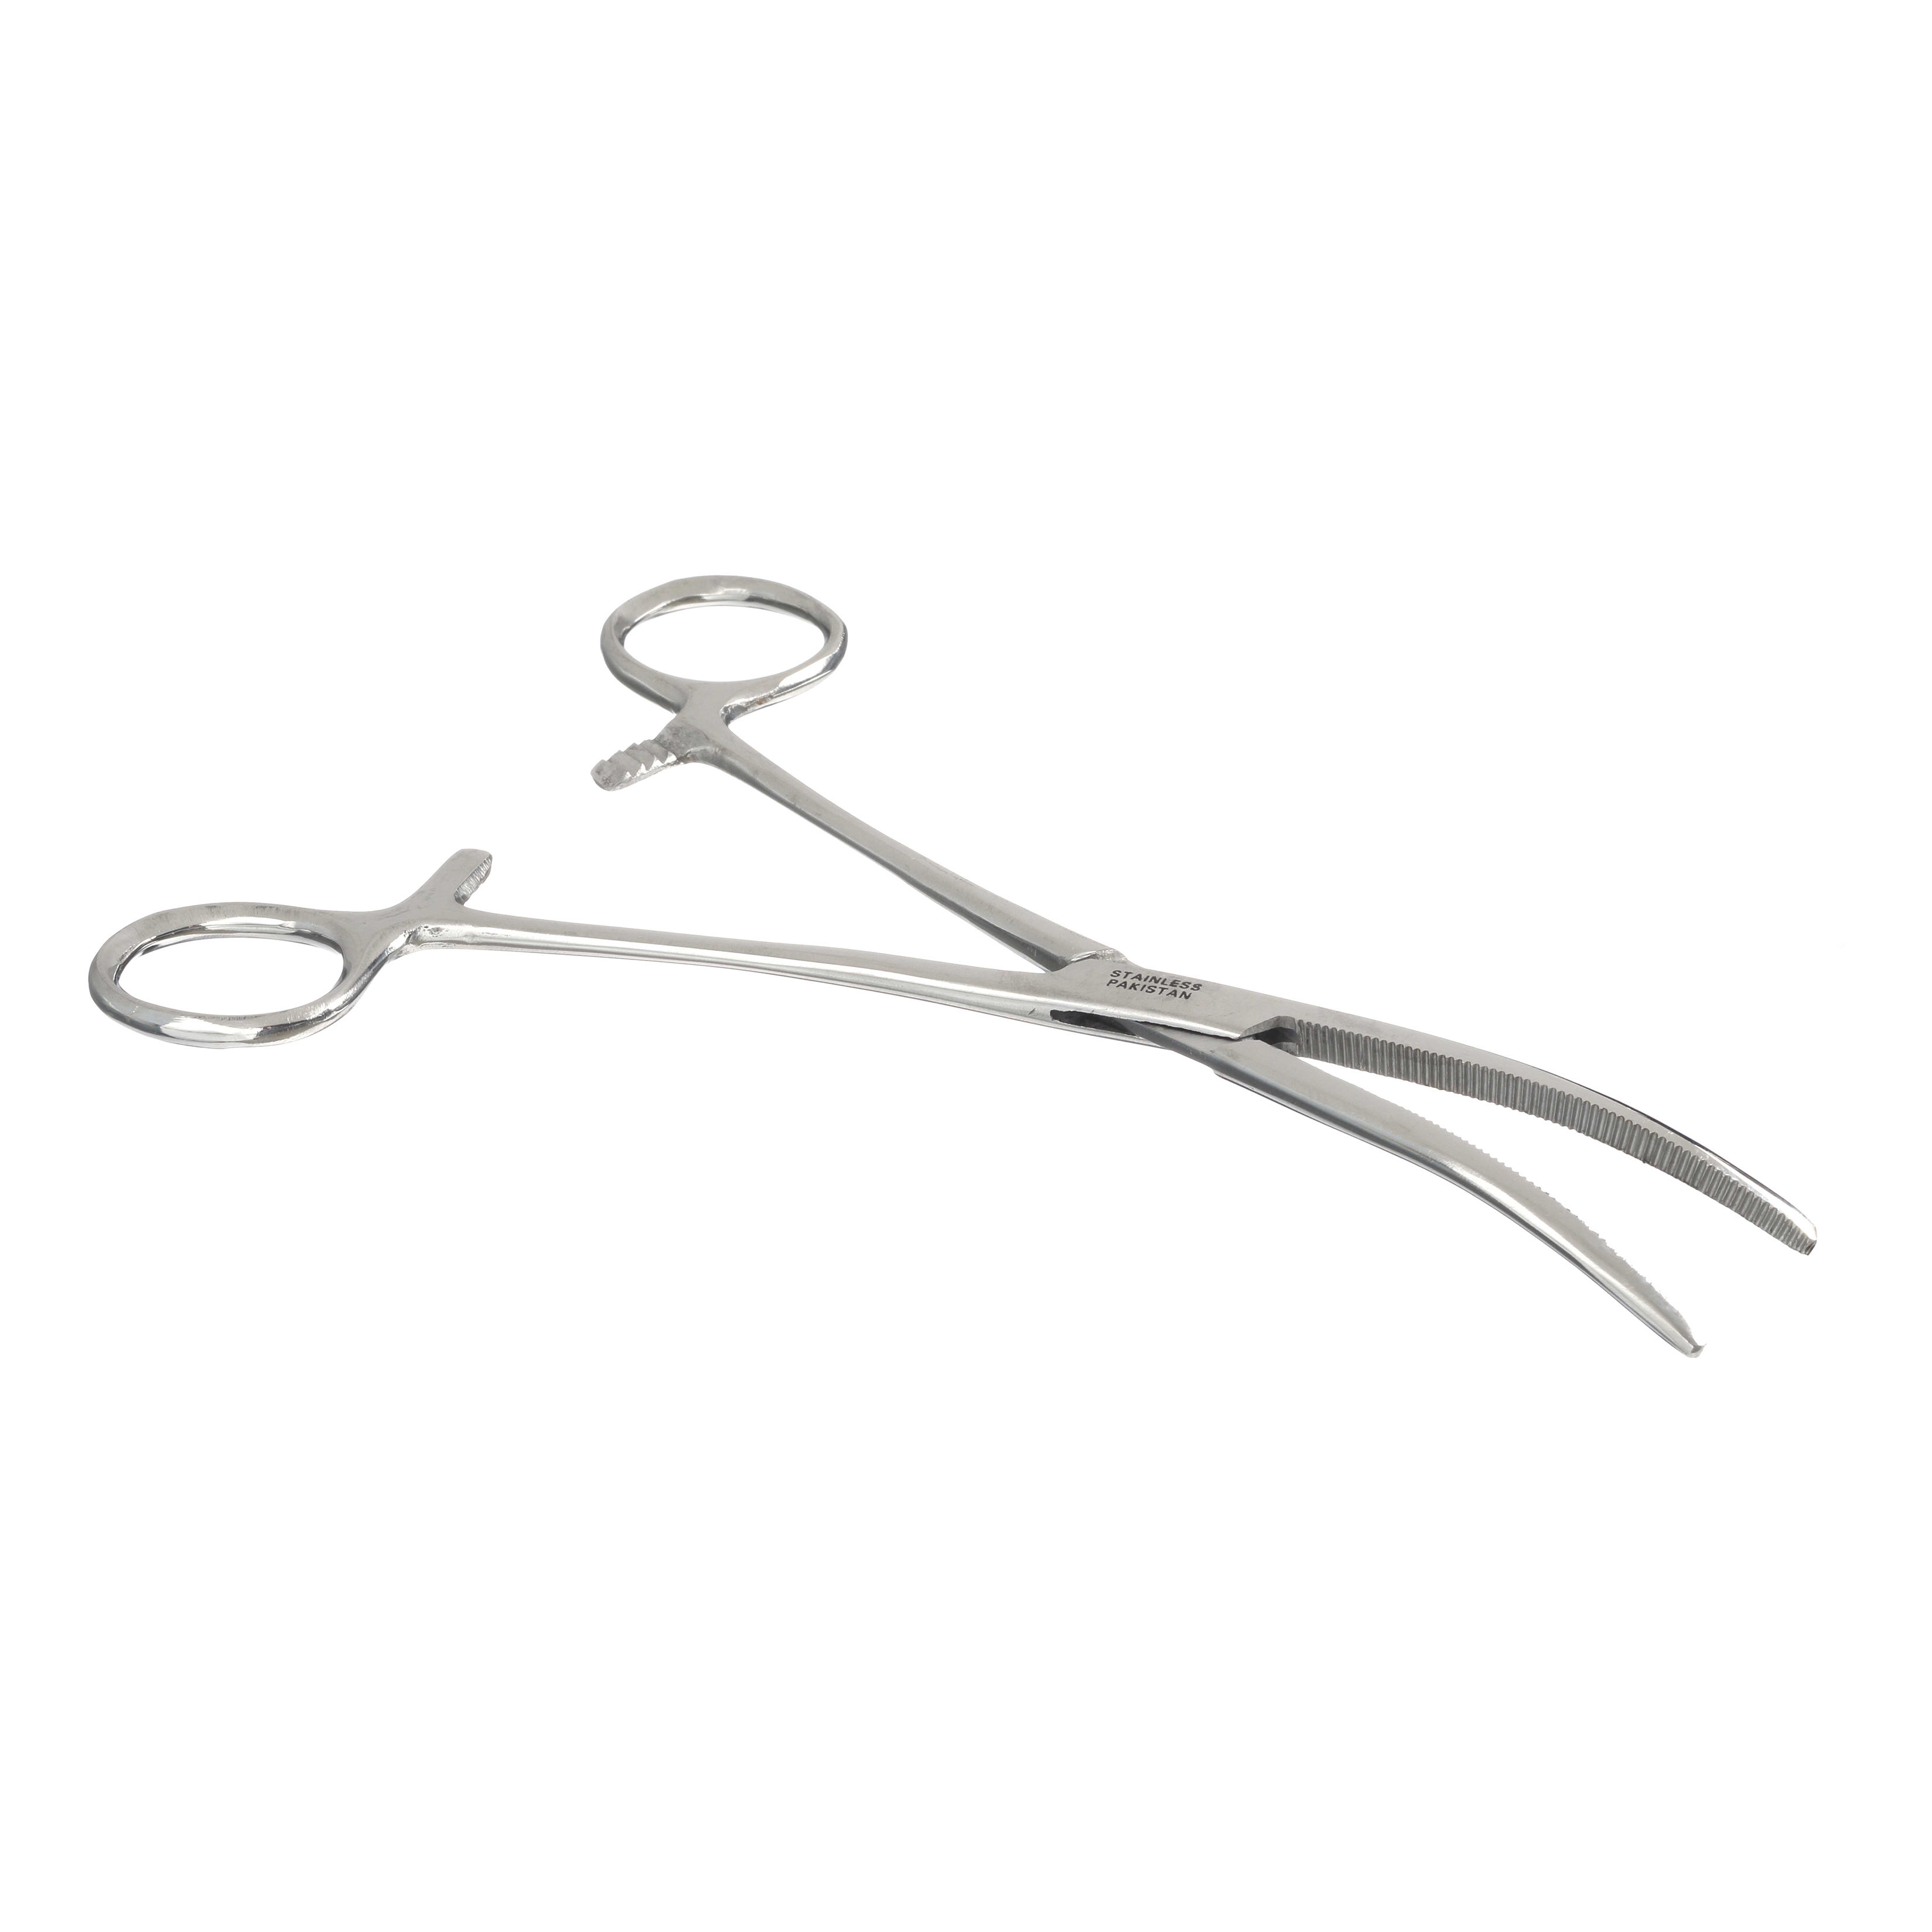 Rapala Fishing Forceps, 7-1/2 Stainless Steel with Lanyard #RFCP